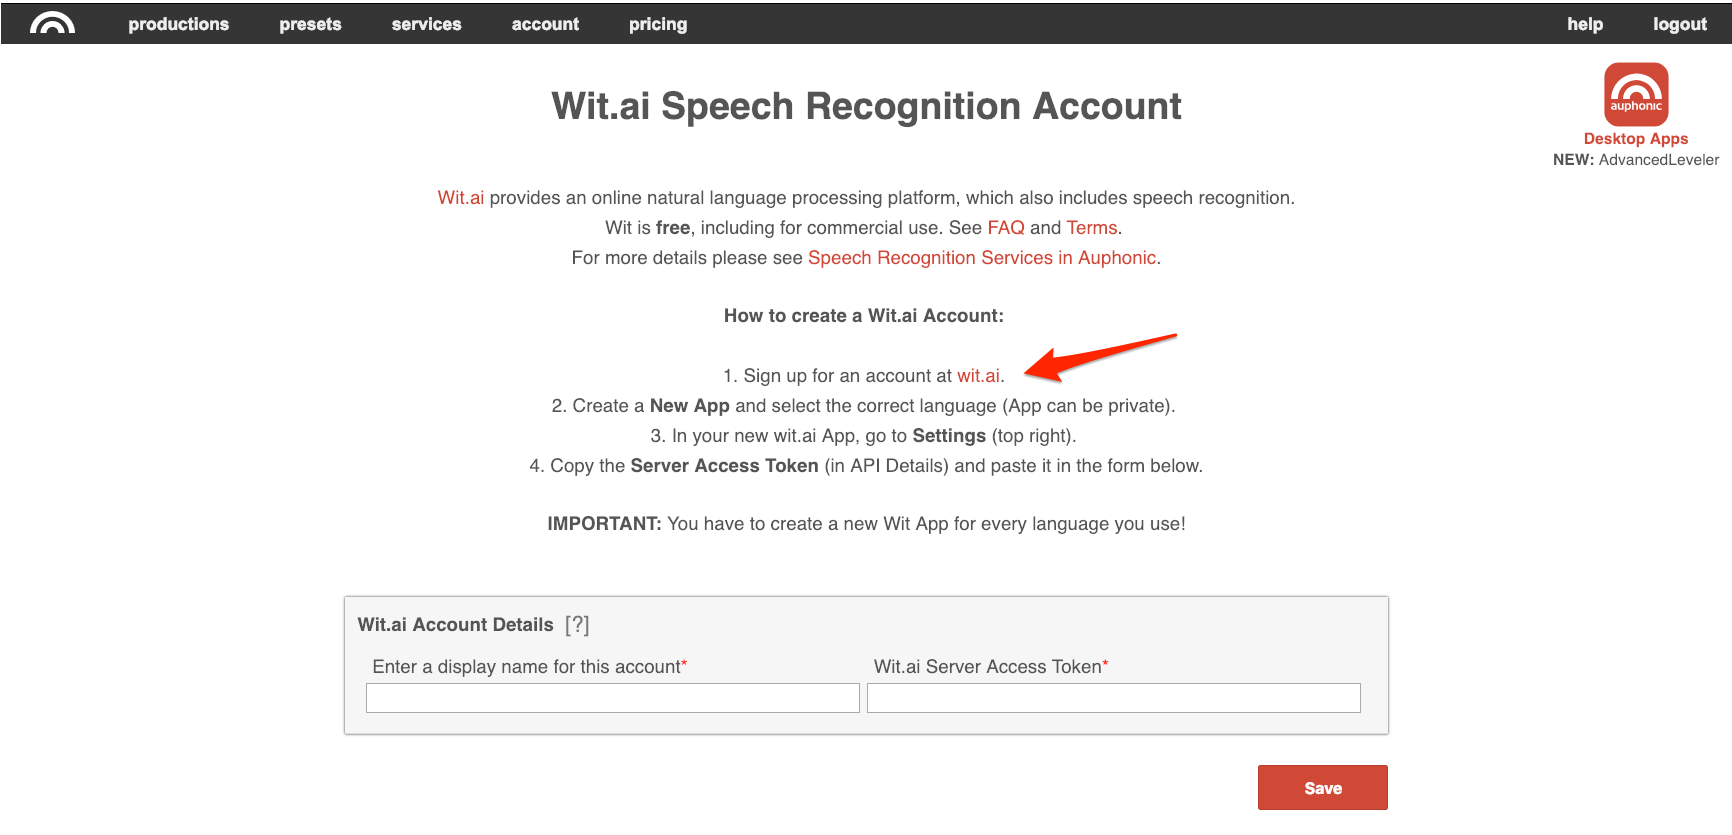 Wit.ai Speech Recognition Account in Auphonic